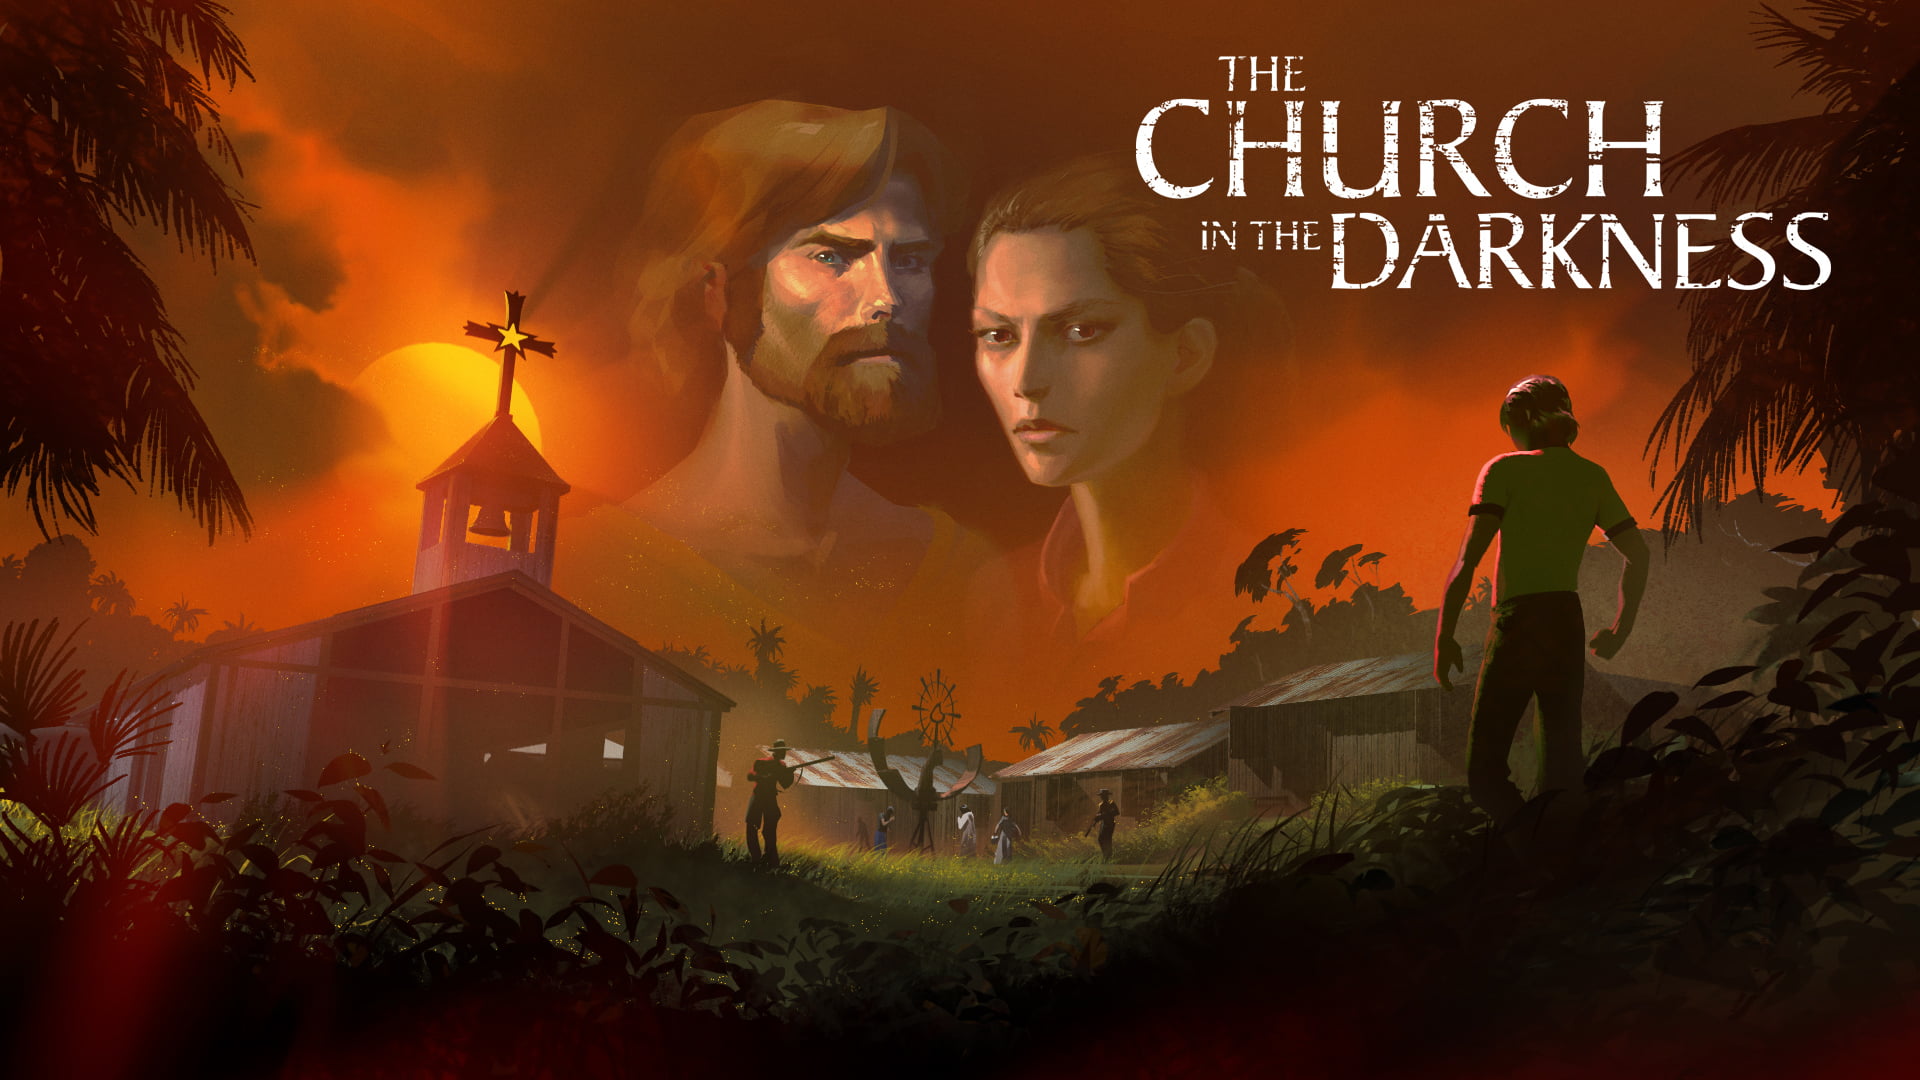 The church in the darkness - review | the church in the darkness | close to the sun | the church in the darkness close to the sun